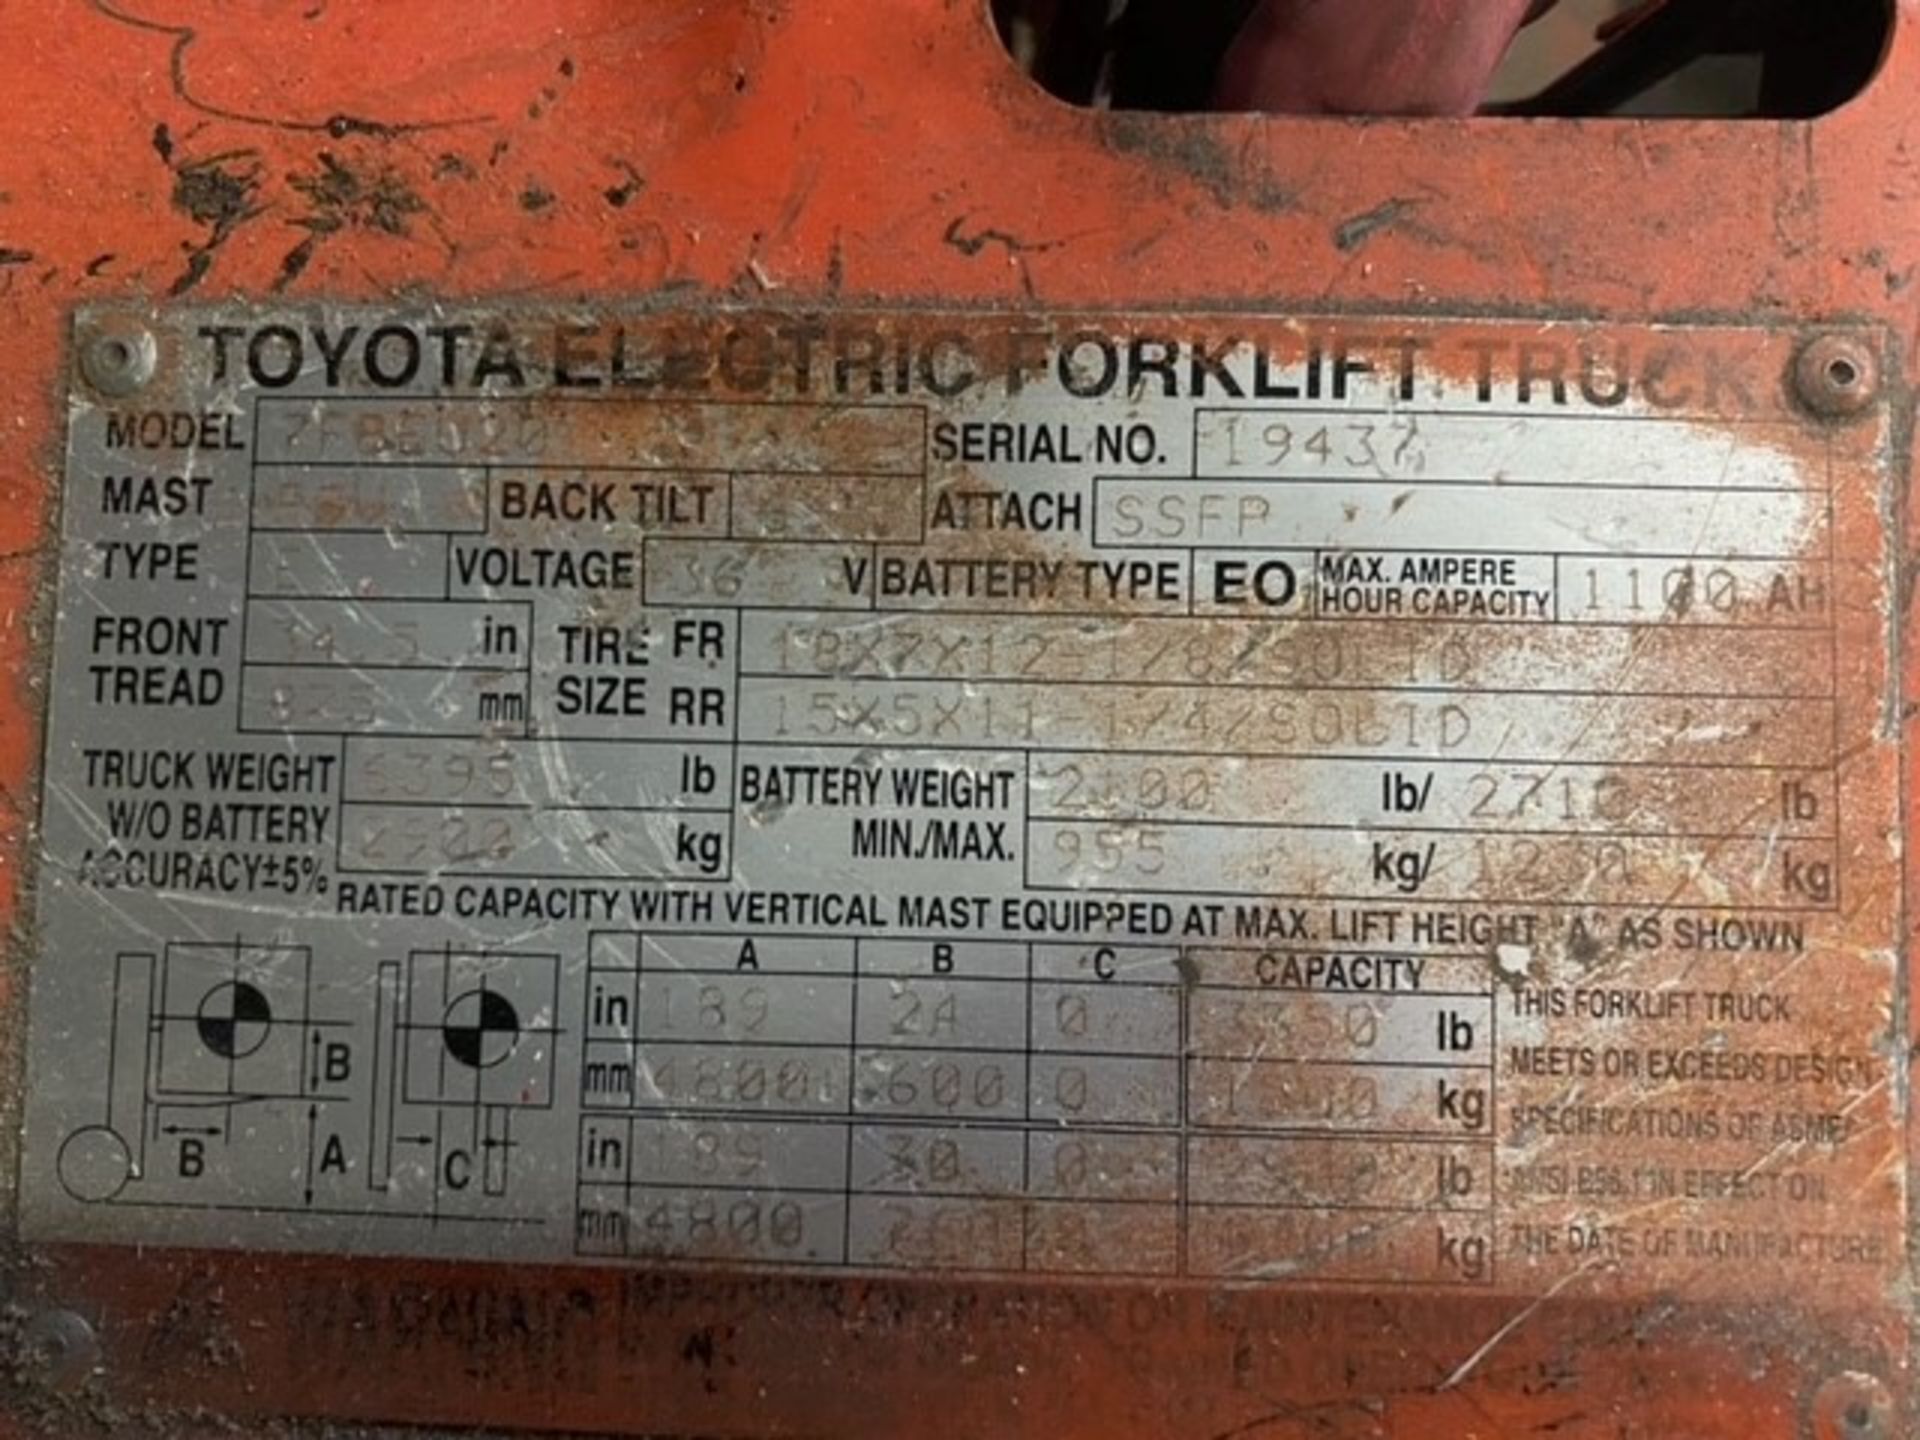 Toyota 3350 lb. Electric Forklift Model 7FBEU20, S/N 19437, Triple Mast, Side Shift (LOCATED IN - Image 3 of 3